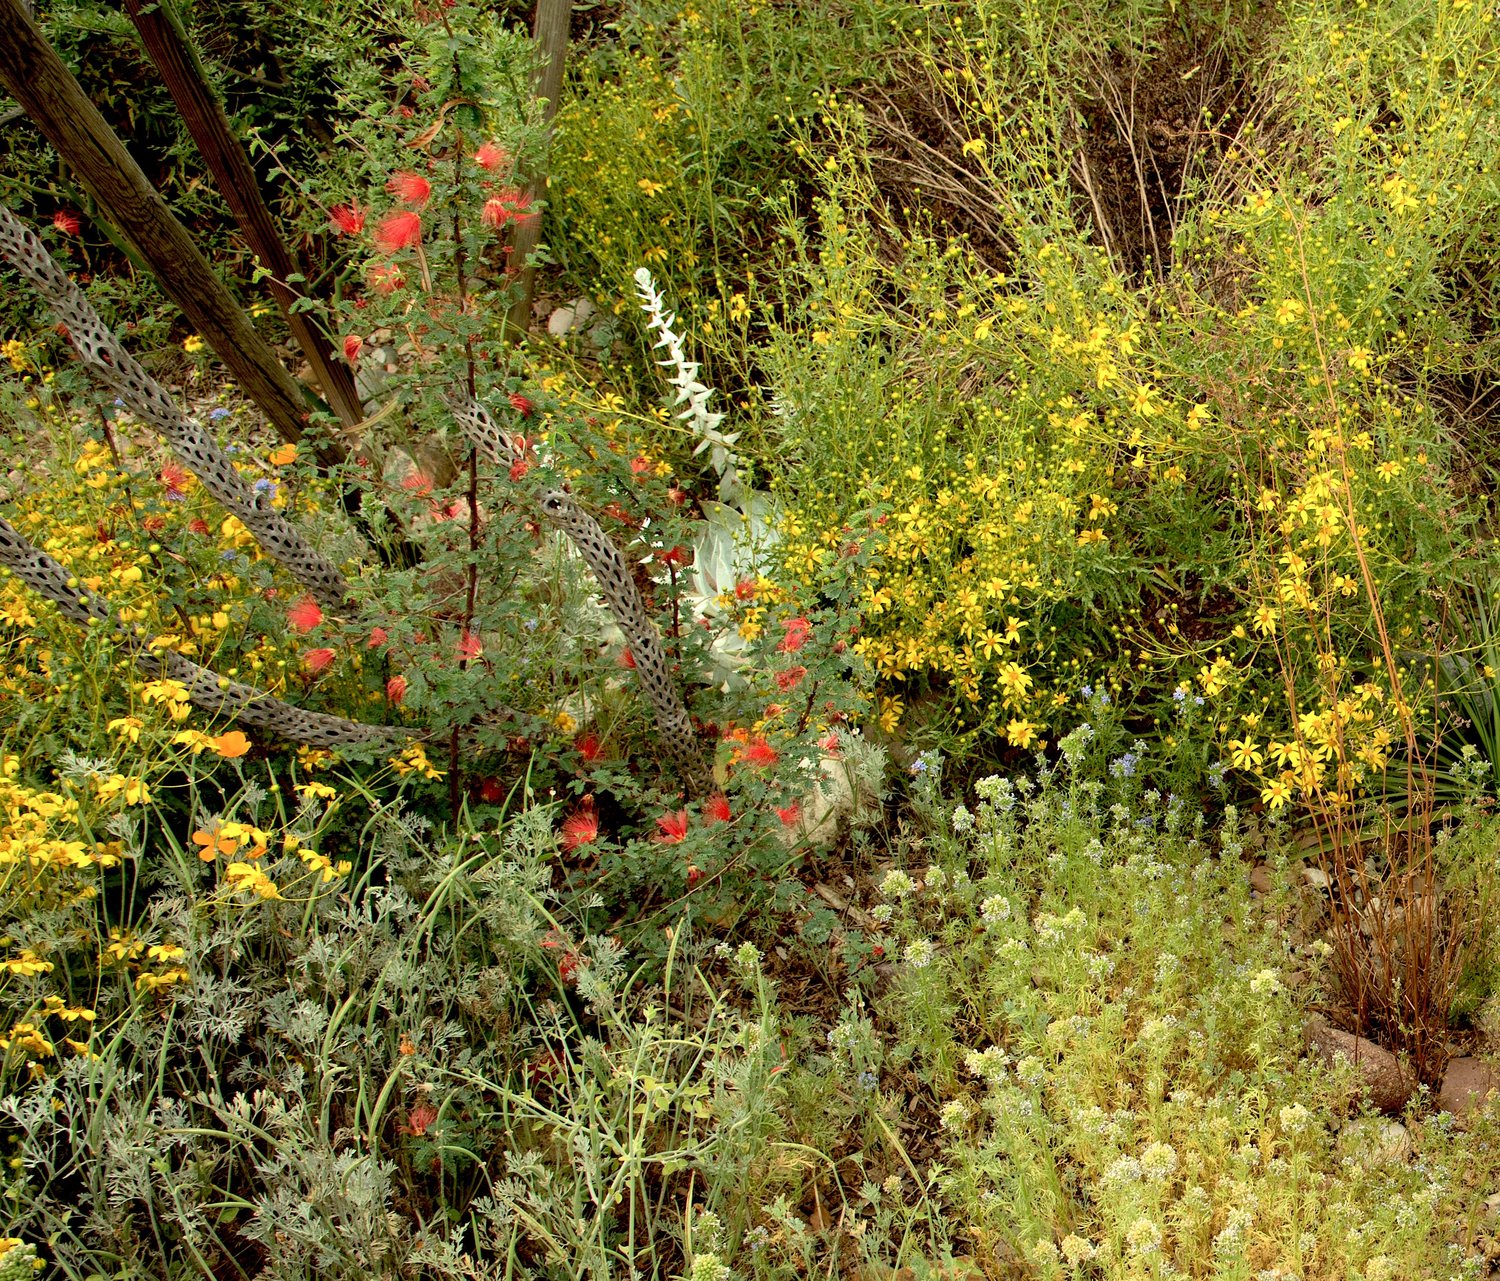 Installation Of California Native Plants And Notes On Pollinators